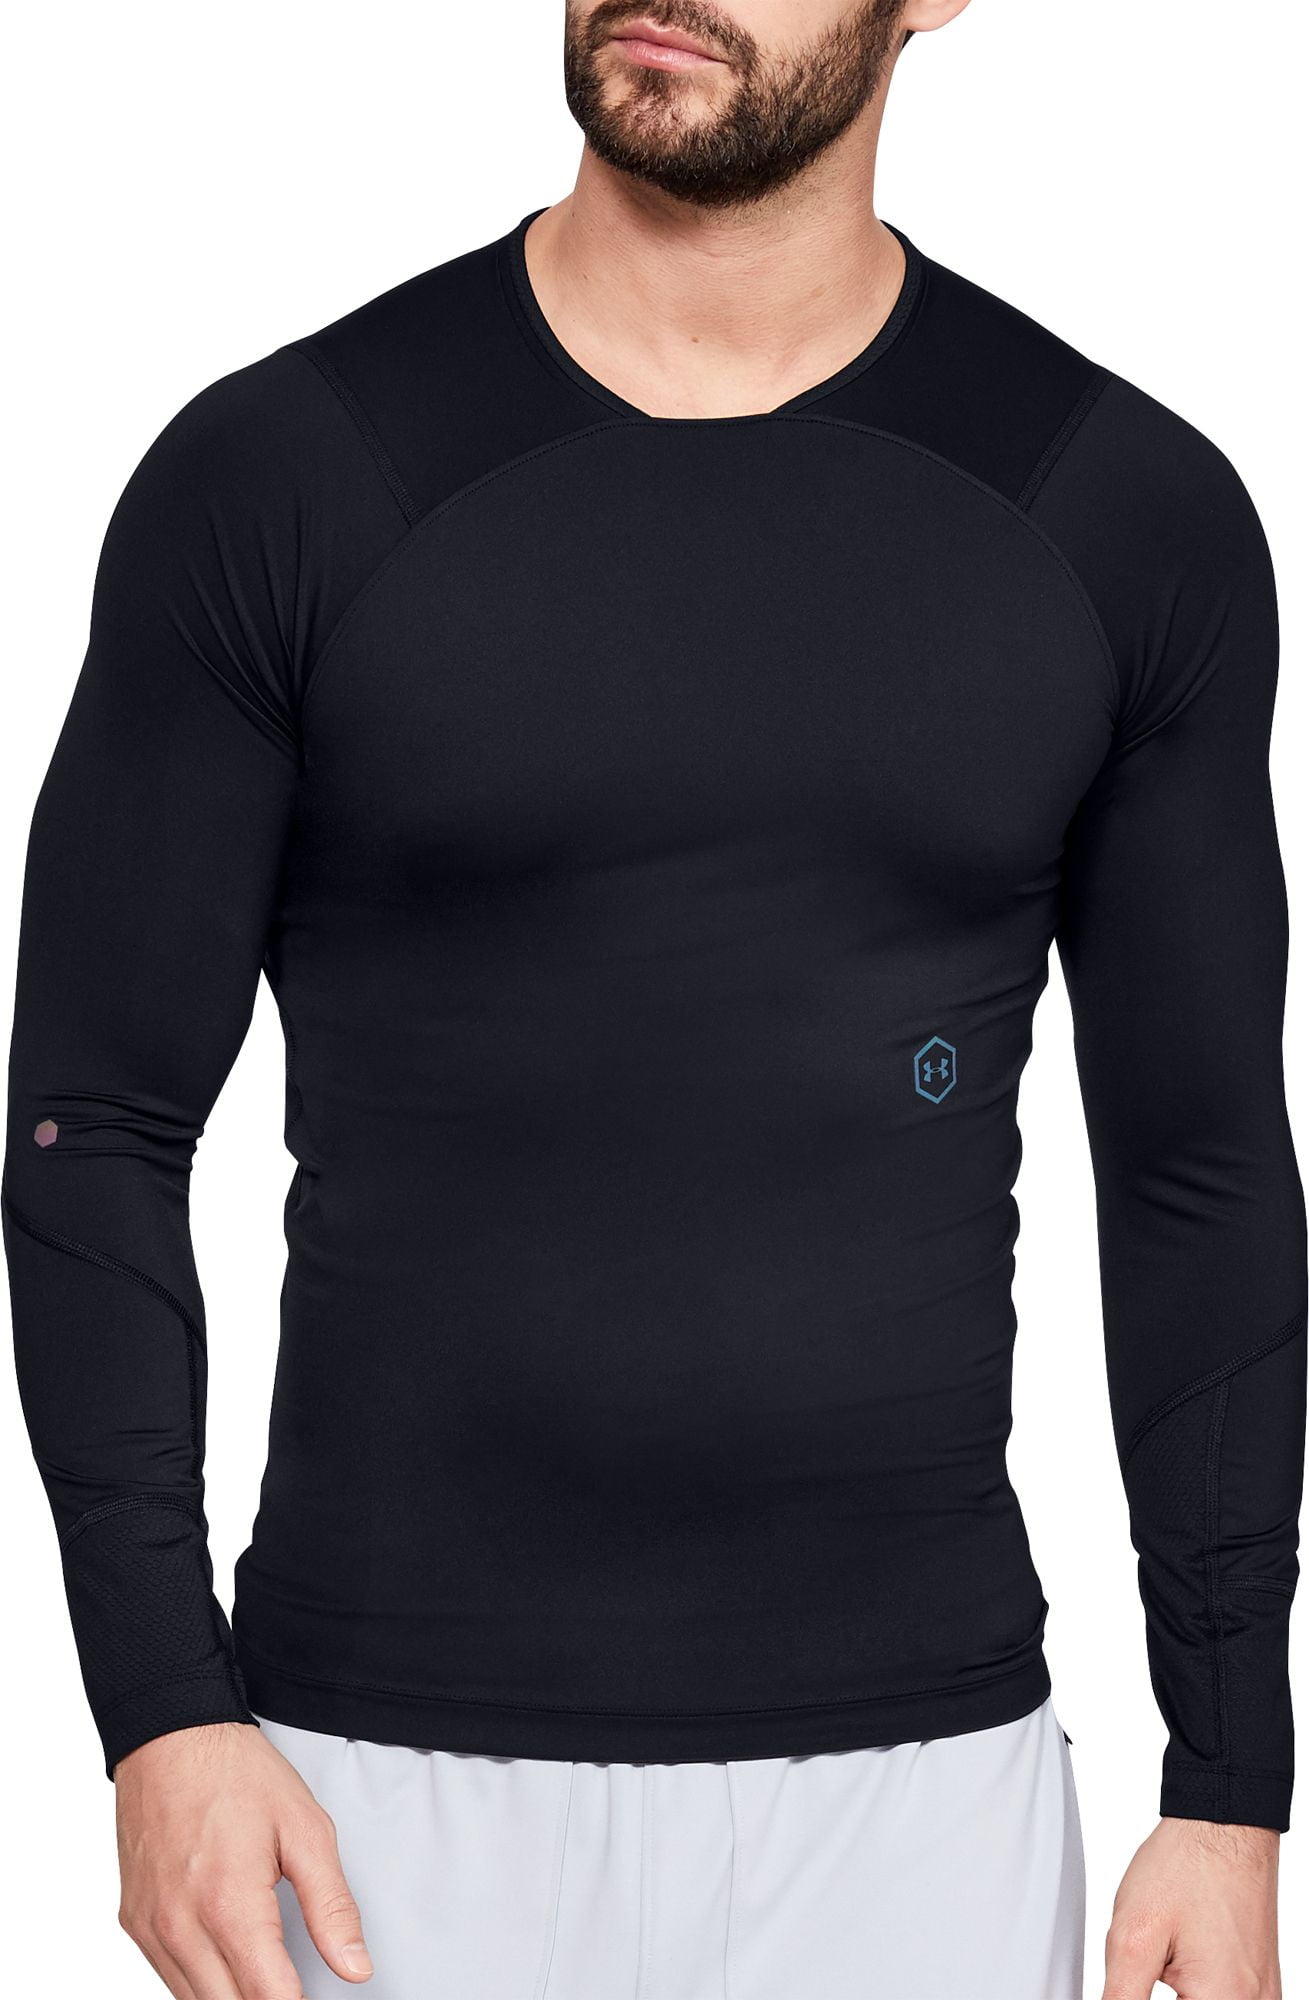 Under Armour - Under Armour Men's RUSH Compression Long Sleeve Shirt ...